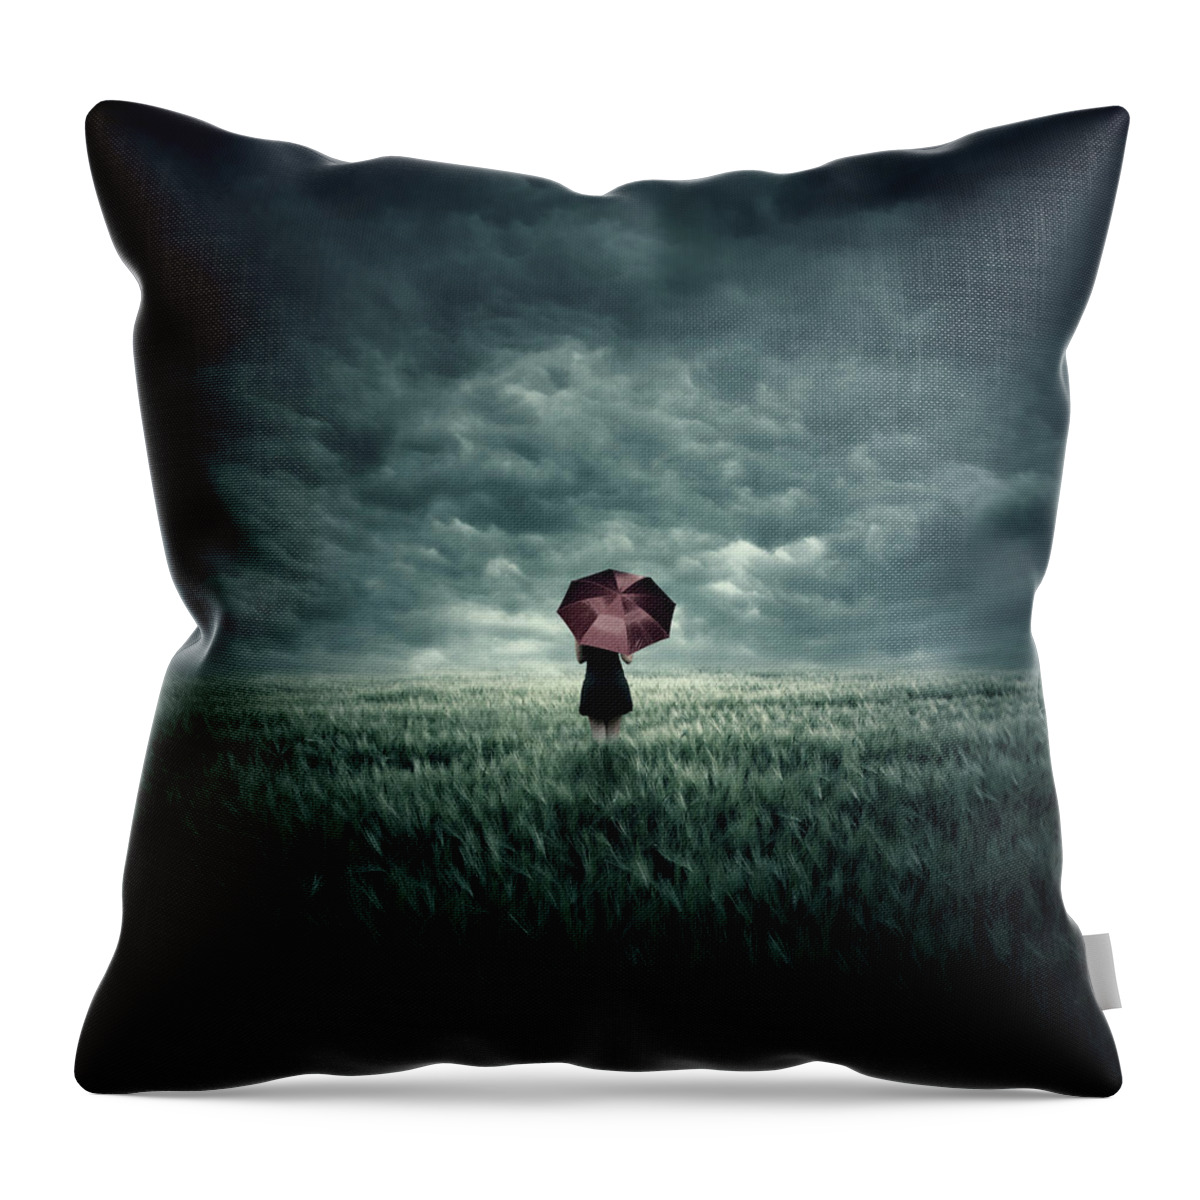 Blue Throw Pillow featuring the digital art Storm is Coming by Zoltan Toth